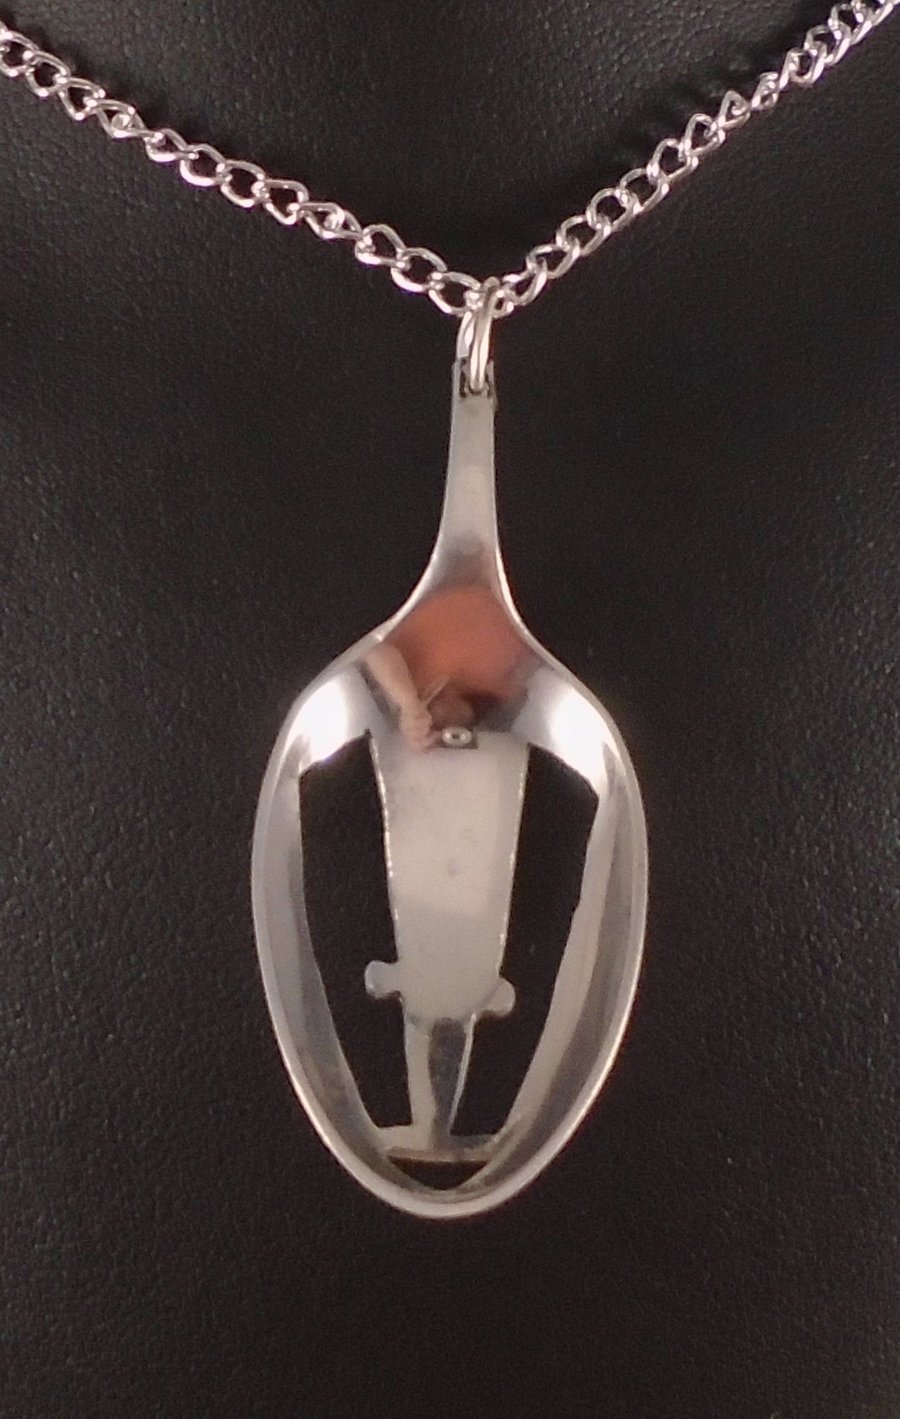 Upcycled Silver Plated Pierced Badger Spoon Necklace SPN082002